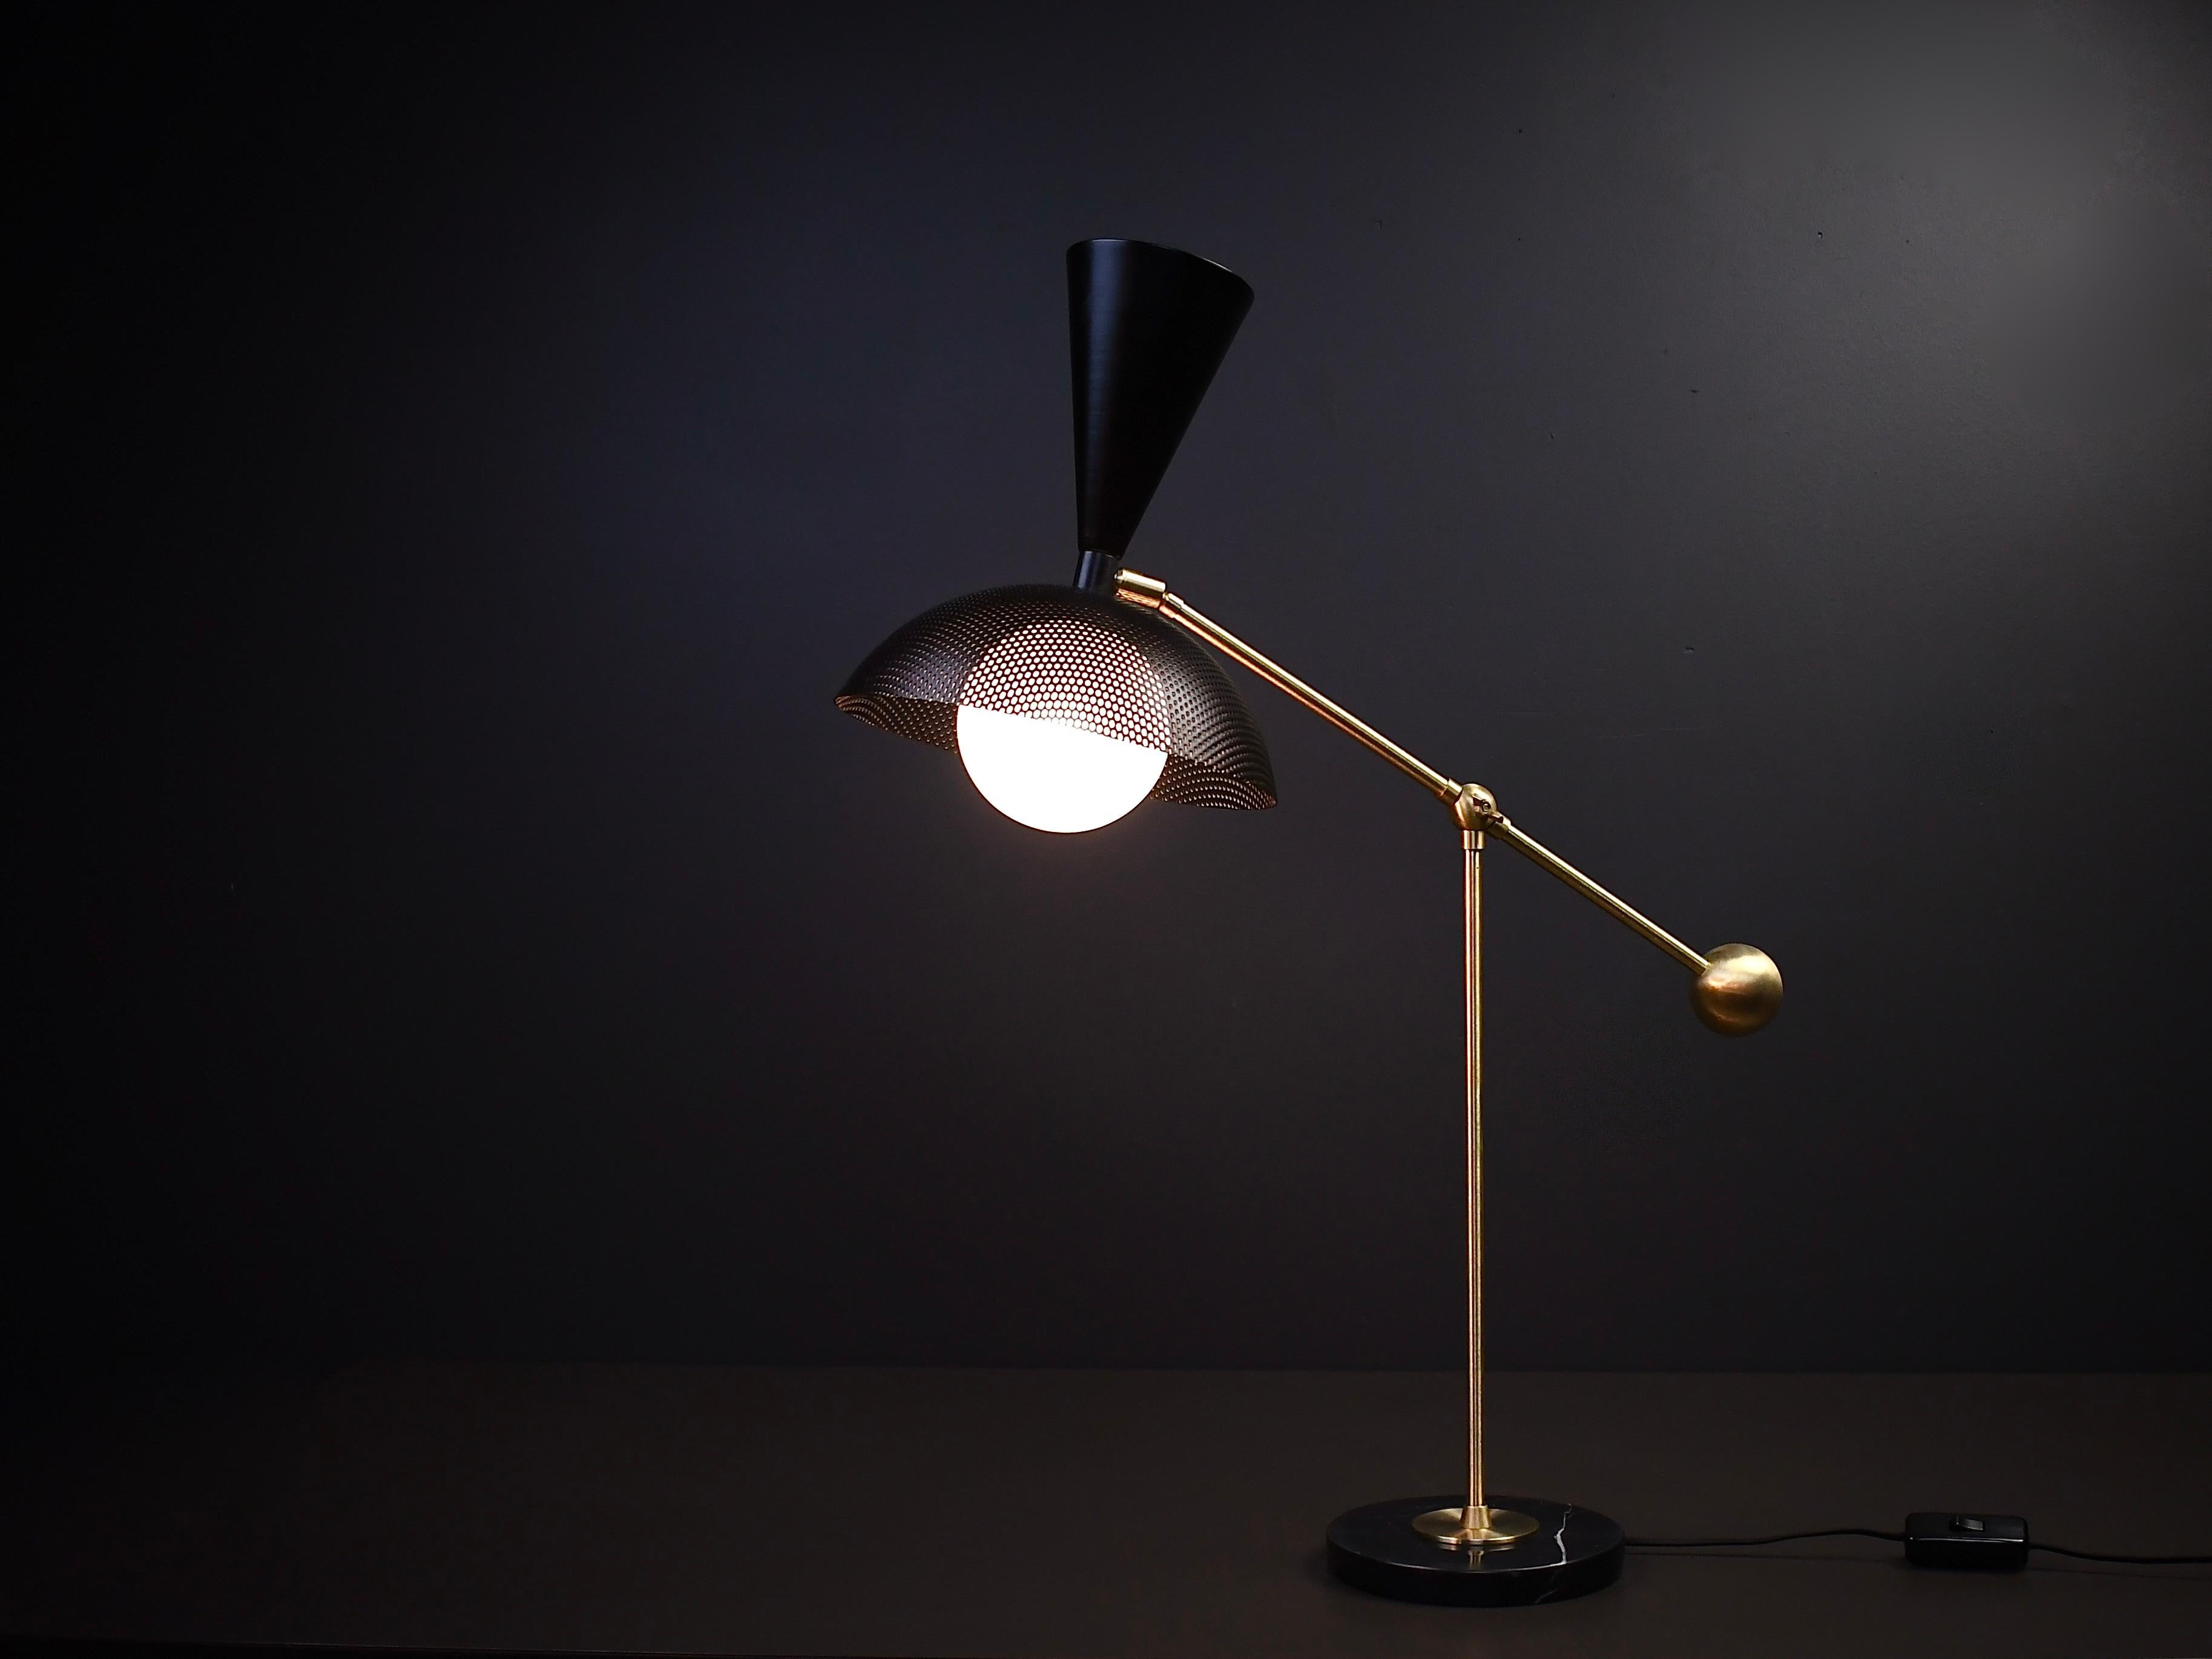 The Molto table lamp or desk lamp is a fresh, new take on Italian modernism, featuring a spun metal mesh shade, brass counterweight and a heavy black marble base. This lamp articulates in two places: the arm joint moves up and down and has a locking